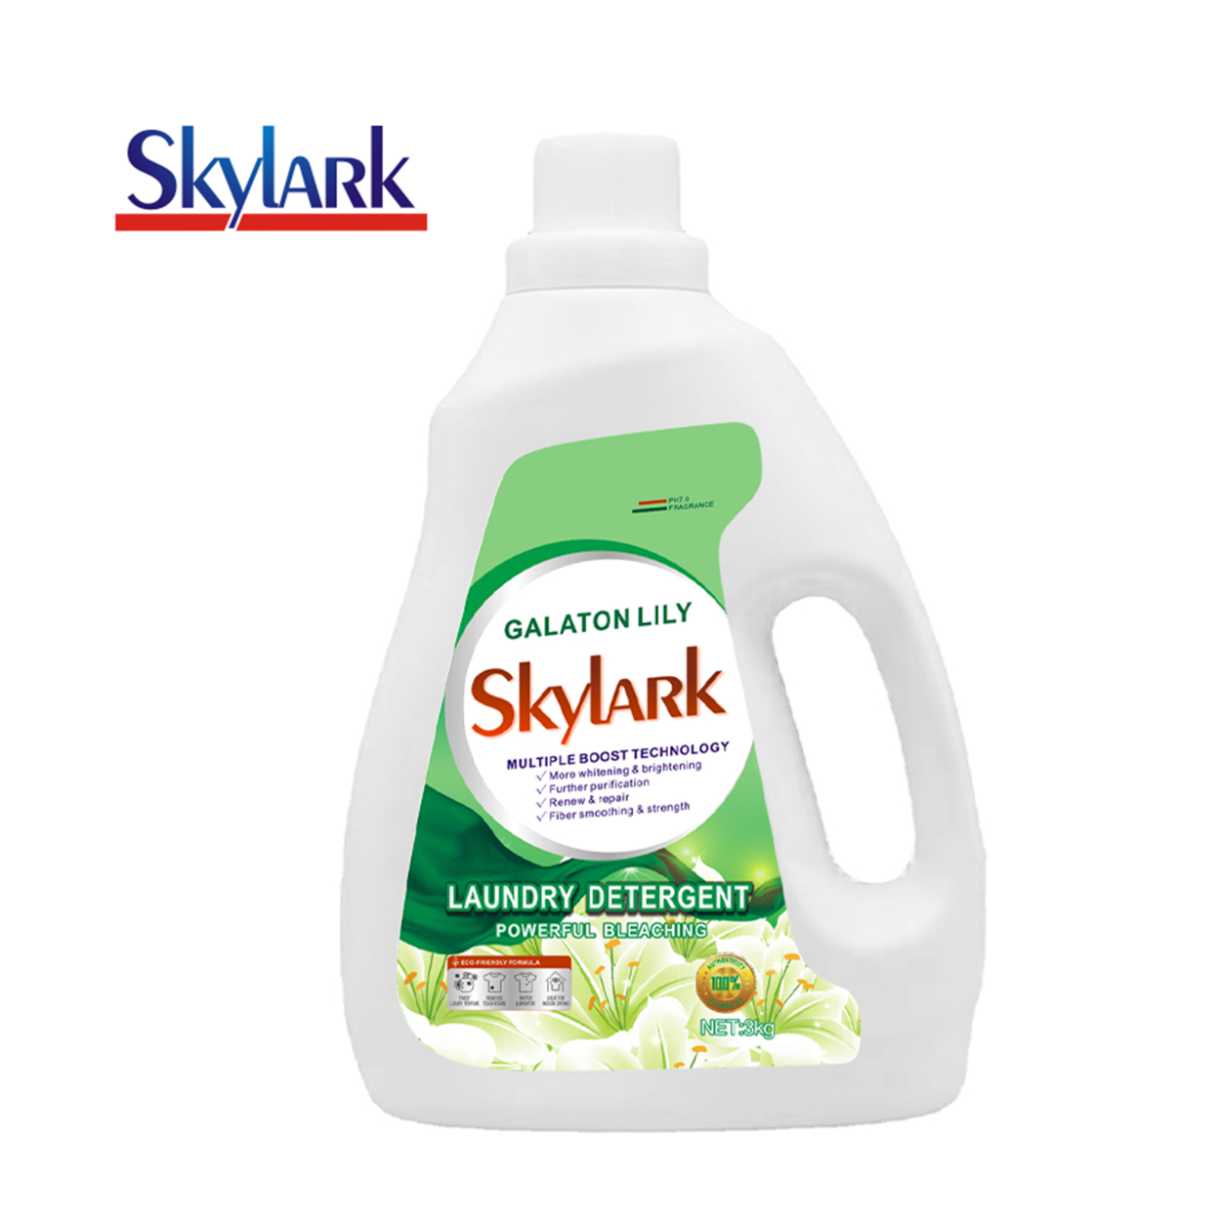 Super Powerful Bleaching Galaton Lily Laundry Detergent With Excellent Performance